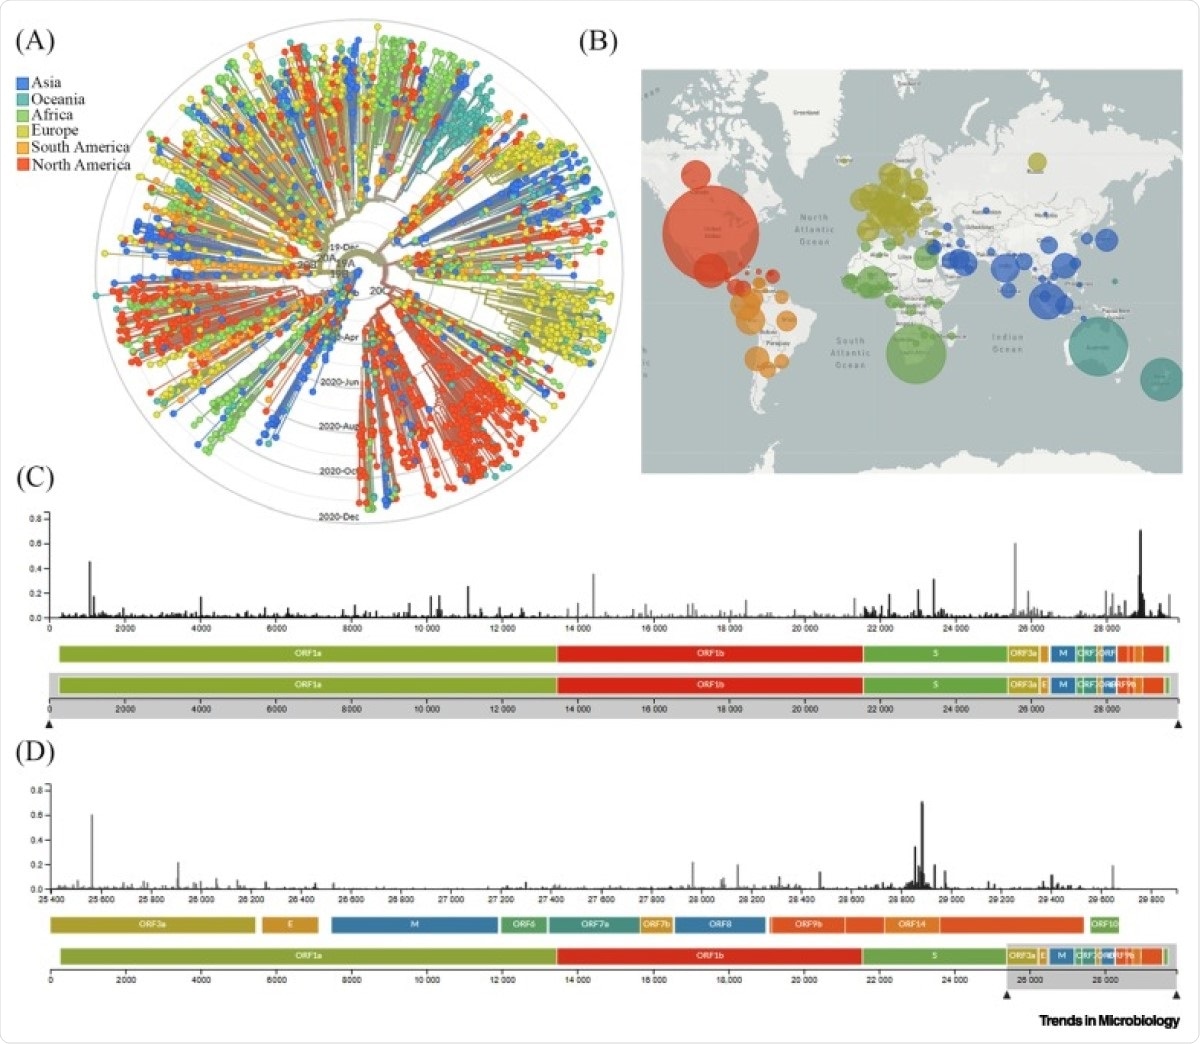 Global Genomic Epidemiology of Novel Coronavirus Severe Acute Respiratory Syndrome Coronavirus-2 (SARS-CoV-2). (A) Phylogenetic analysis of 3485 genomes of SARS-CoV-2 sequences globally from December 2019 to December 2020. The different genetic variants of circulating SARS-CoV-2 are grouped into five clades defined by specific signature mutations showing their global distribution on the time scale. The clades 19A and 19B dominated the early outbreak in Wuhan and represent a higher proportion in Asia. Clades 20A, 20B, and 20C dominate in Europe and North America. (B) Geographical distribution of genomes. Each circle is centered on an individual country. The color indicates the region, and the size (area) of the circle represents the number of genomes from that country. (C) A ‘diversity’ panel that shows the novel coronavirus genome, its genes, and sites of amino acid mutations. (D) Subsection of subfigure (C) highlighting the mutation pattern in the 25 400–29 800 bp range of the genome. Apart from the spike (S) region, the genomic regions of open reading frame (ORF)14, ORF9b, ORF8, and ORF3a appear to be highly variable between clinical isolates of SARS-CoV-2. Source: latest global SARS-CoV-2 updated daily at https://nextstrain.org/sars-cov-2. Abbreviations: E, envelope; M, membrane.